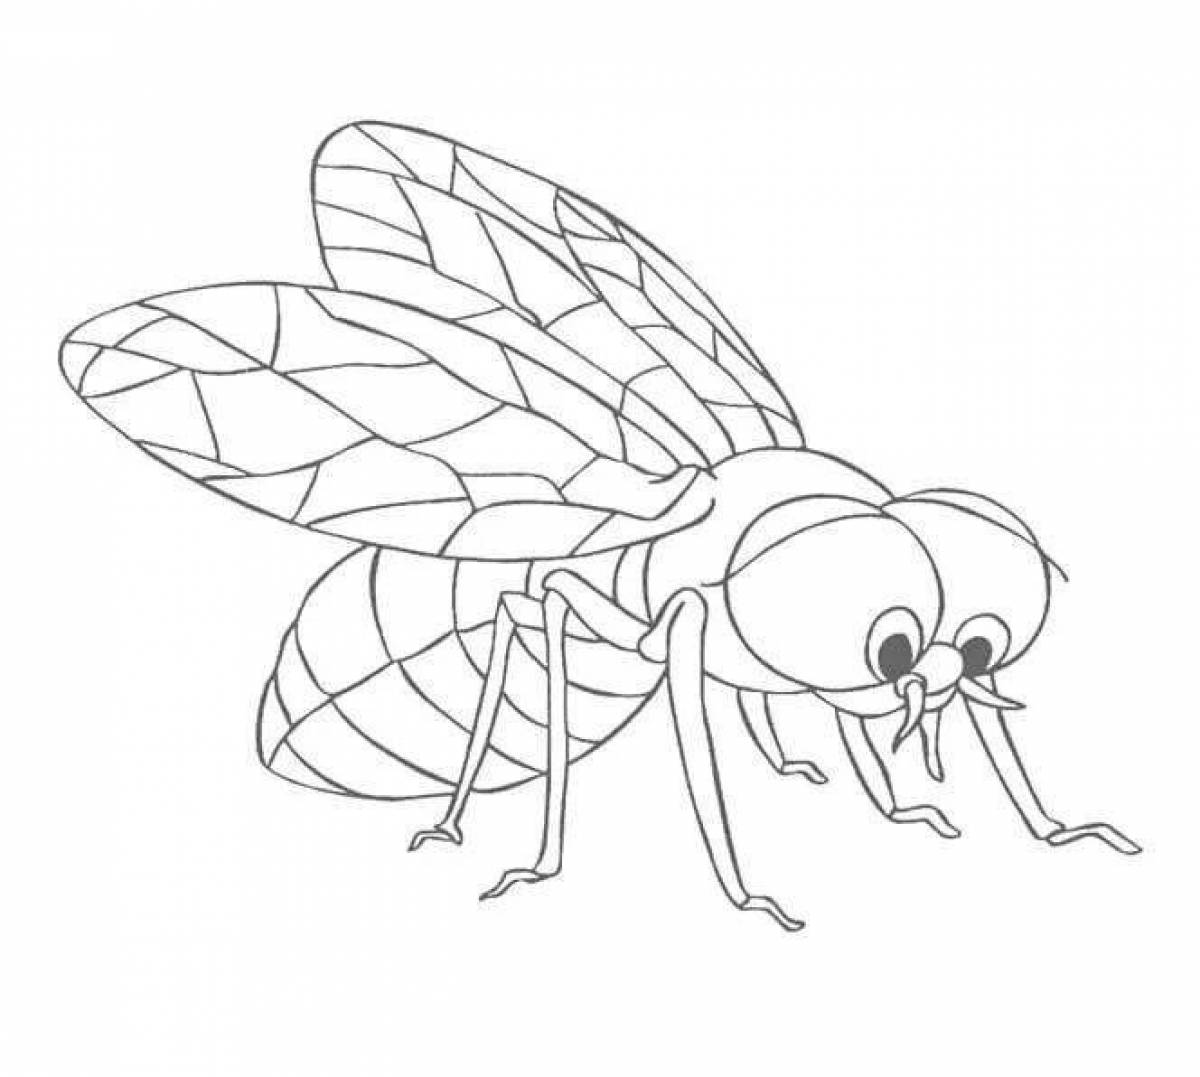 Playful fly coloring page for kids